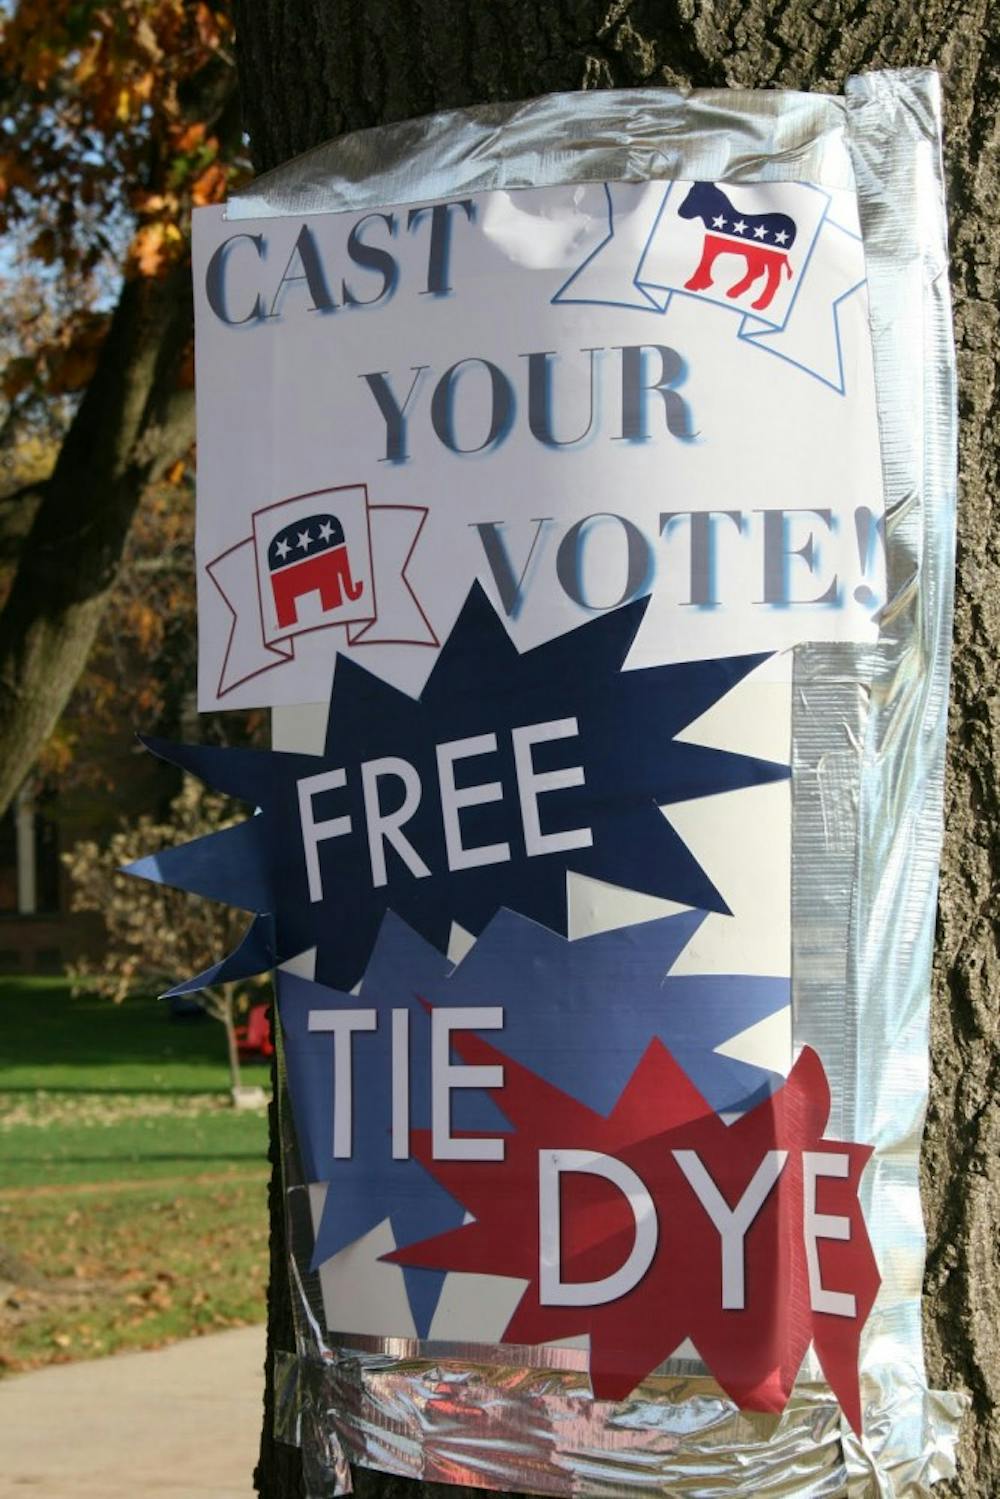 Students tie-dye a shirt for the upcoming election